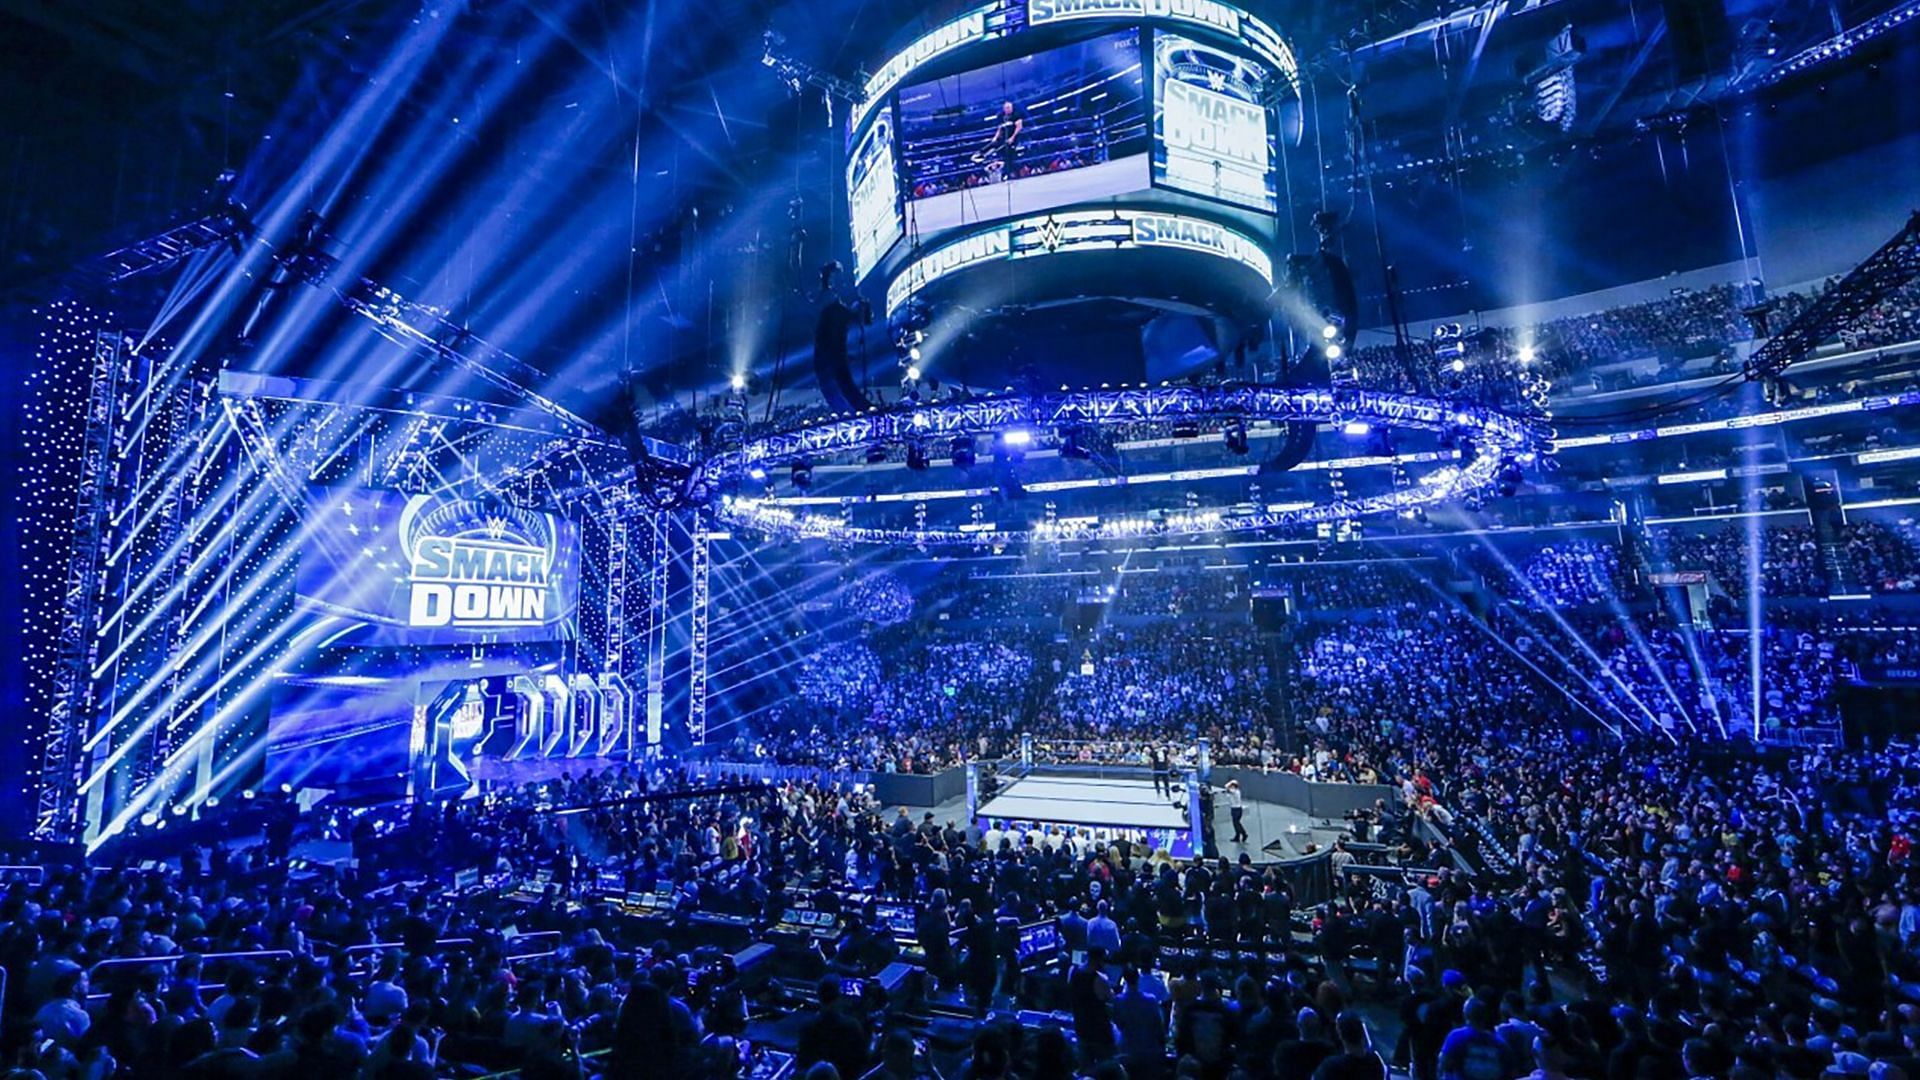 The WWE SmackDown logos and ring/stage on display inside arena